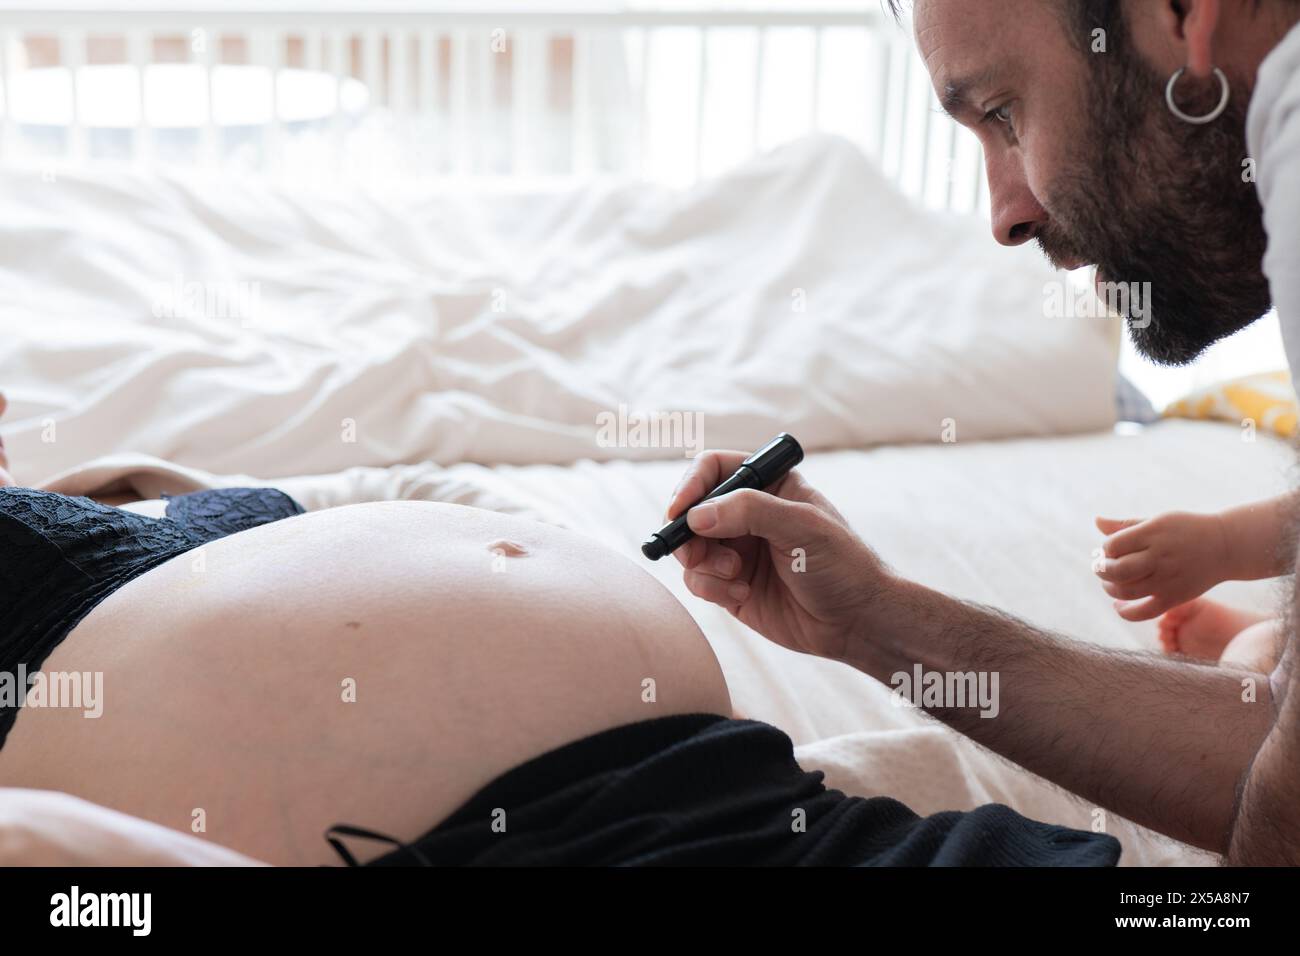 A soon-to-be father engages in a tender moment, drawing on his pregnant partners exposed belly while they sit on a bed Stock Photo